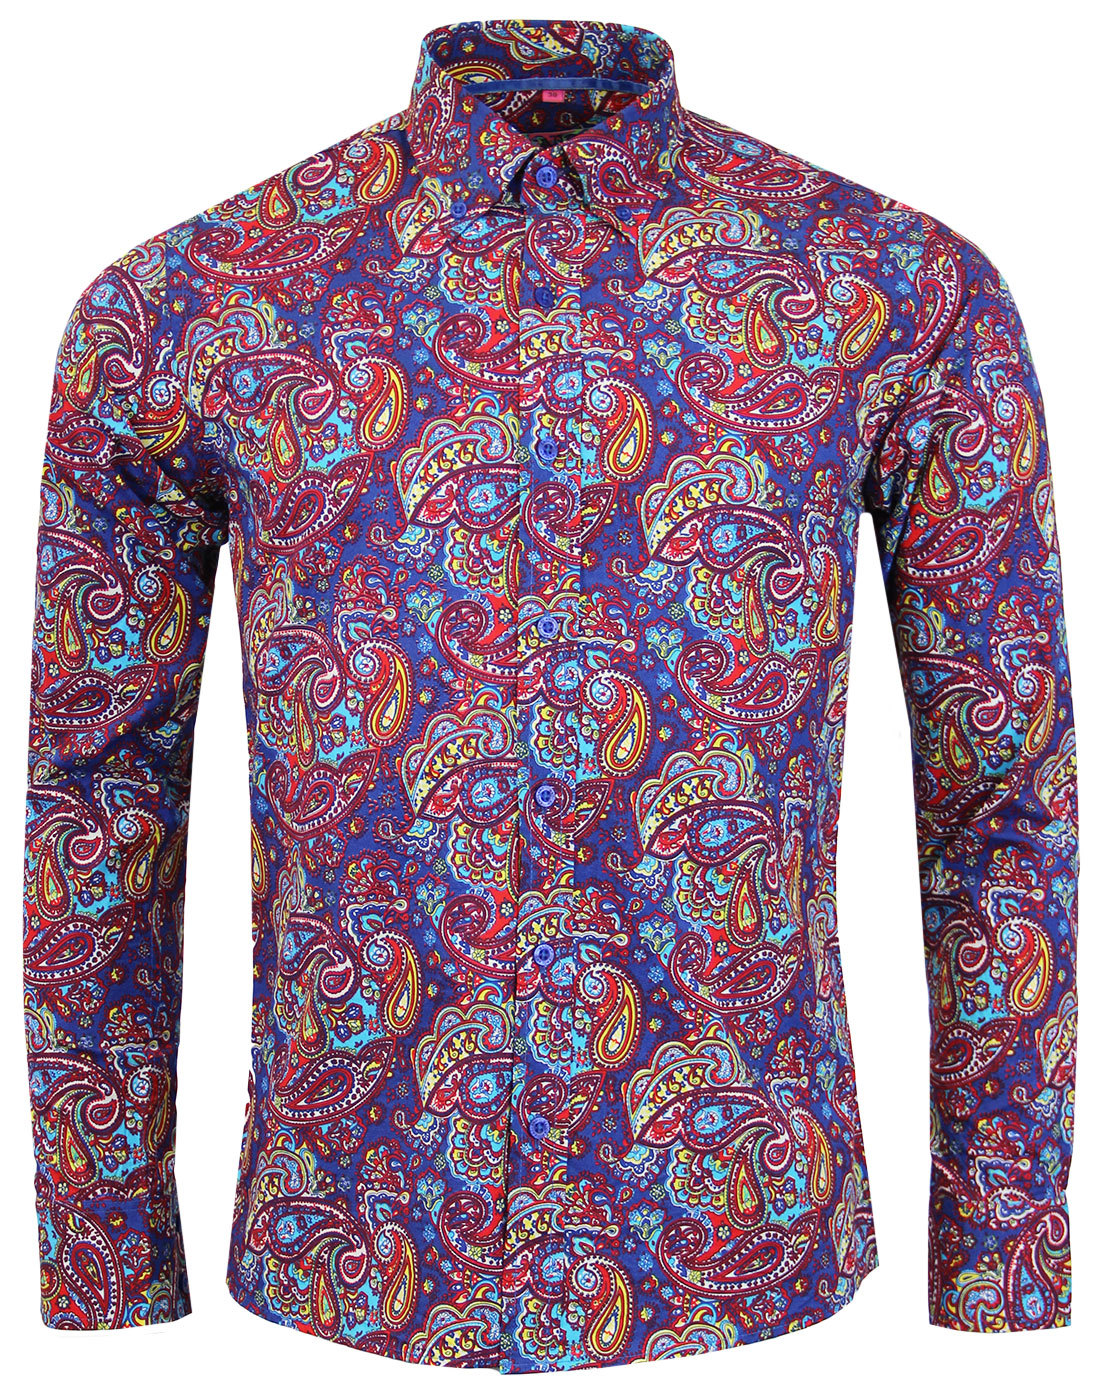 MADCAP ENGLAND Tabla Paisley Psychedelic 1960s Mod Shirt in Royal